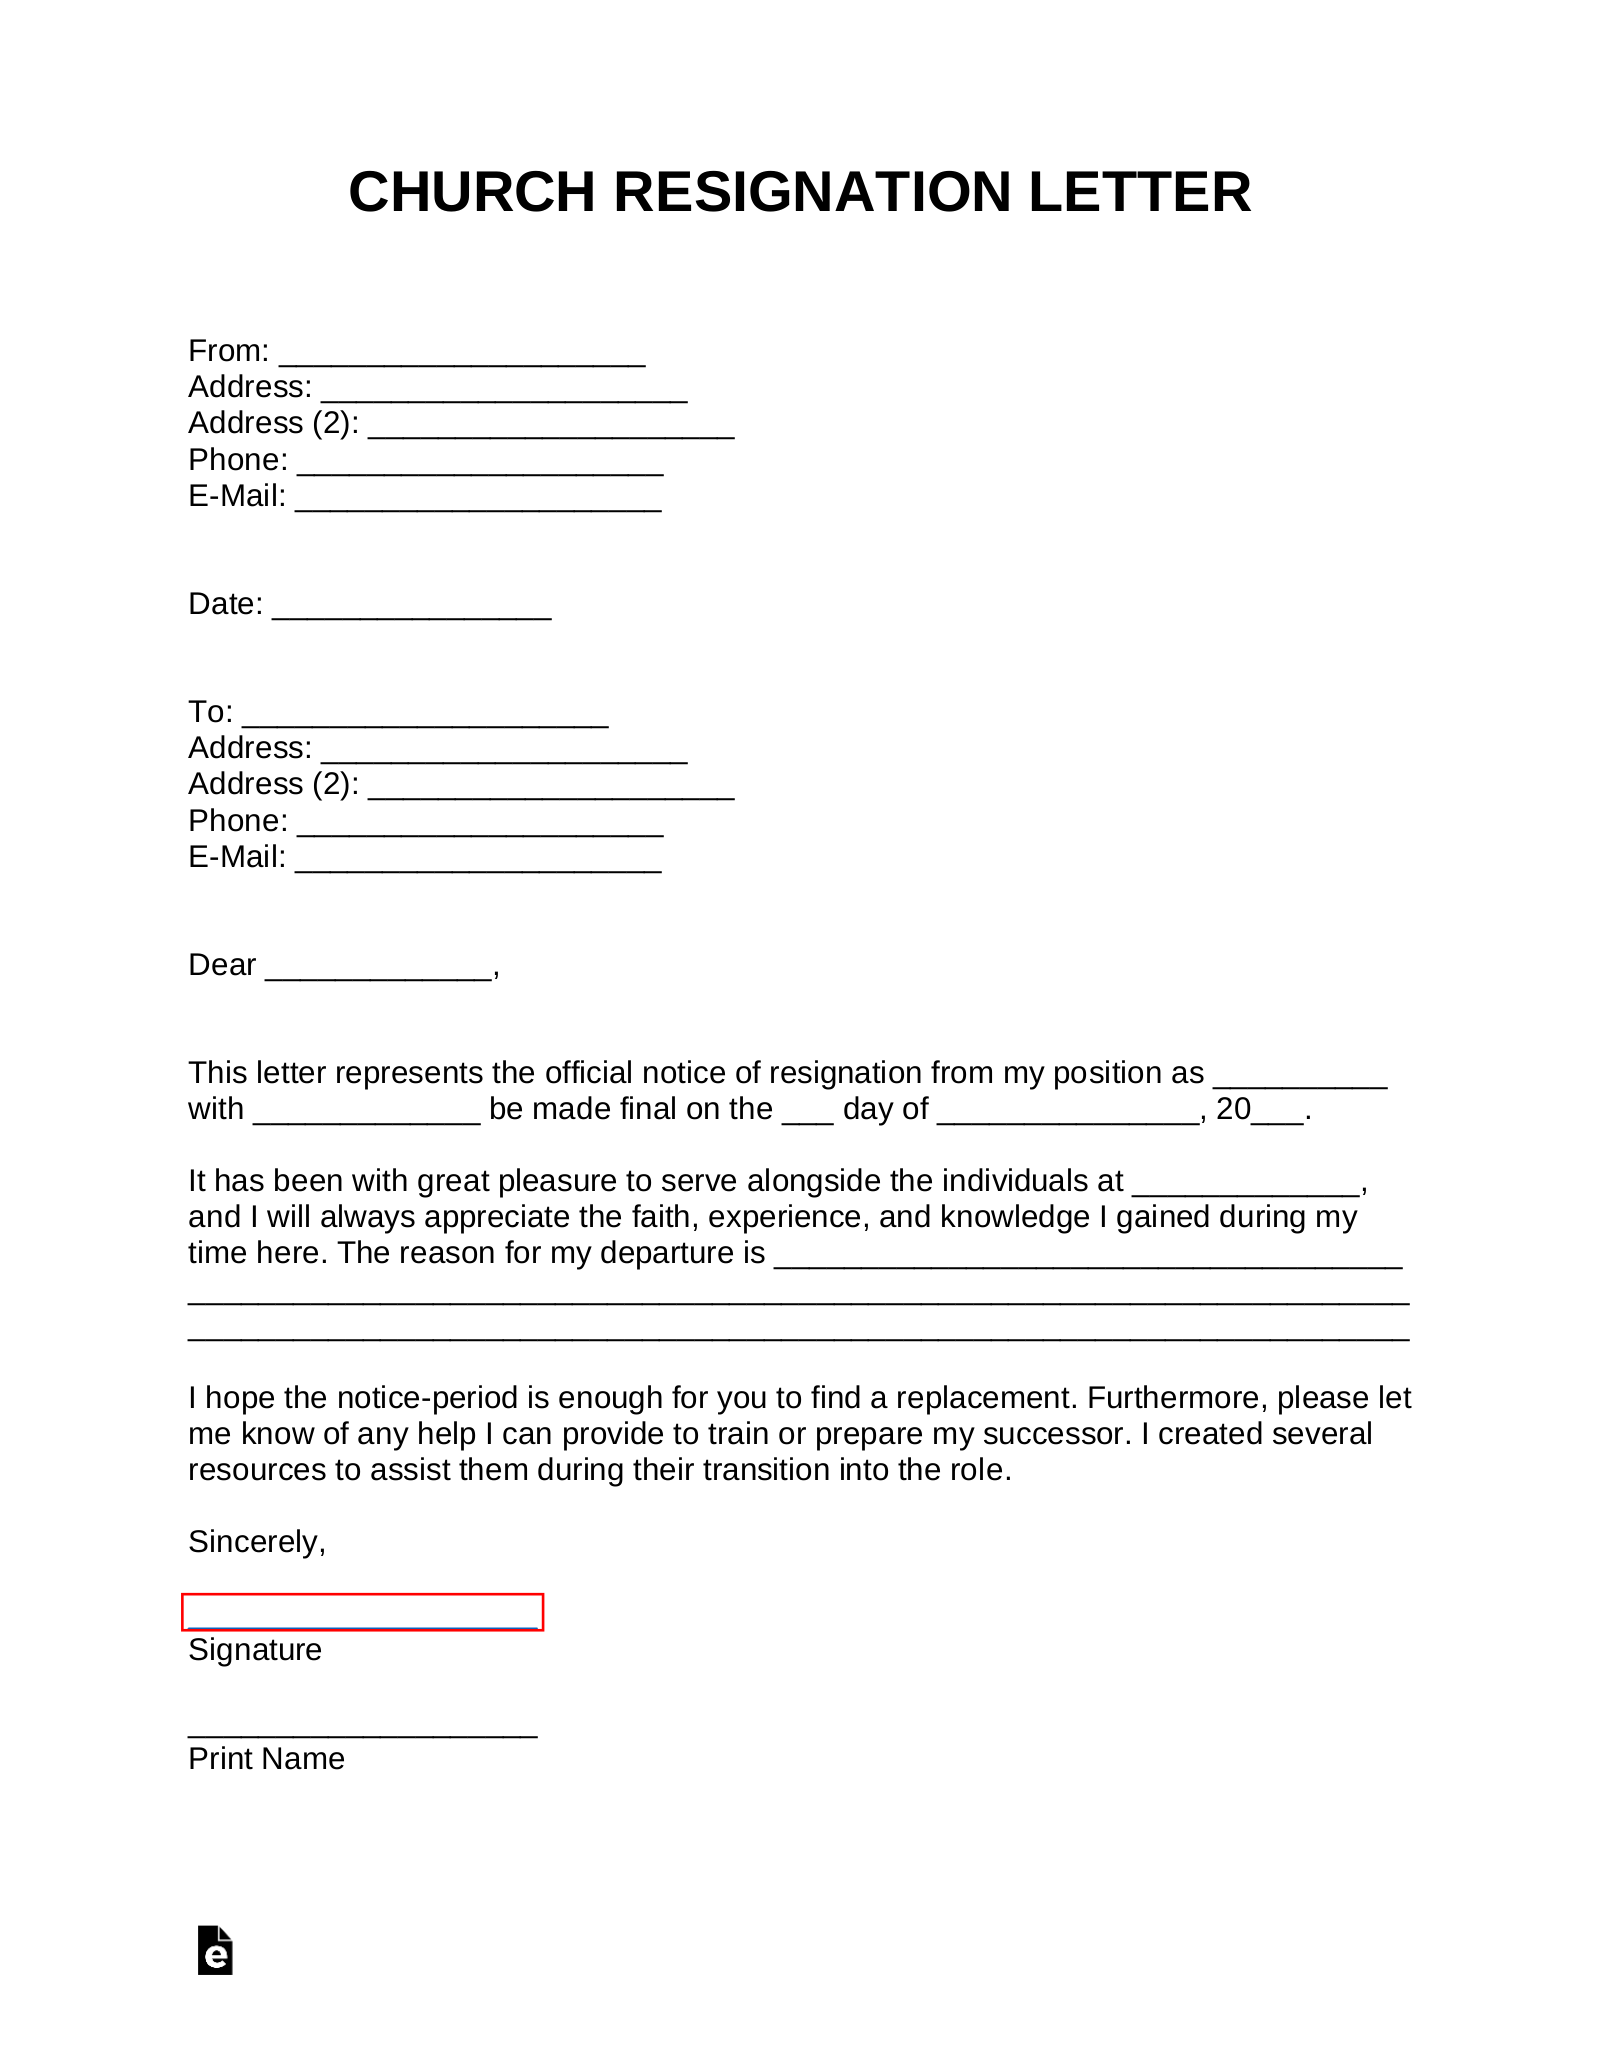 Church (Religious Group) Resignation Letter Template – with Samples